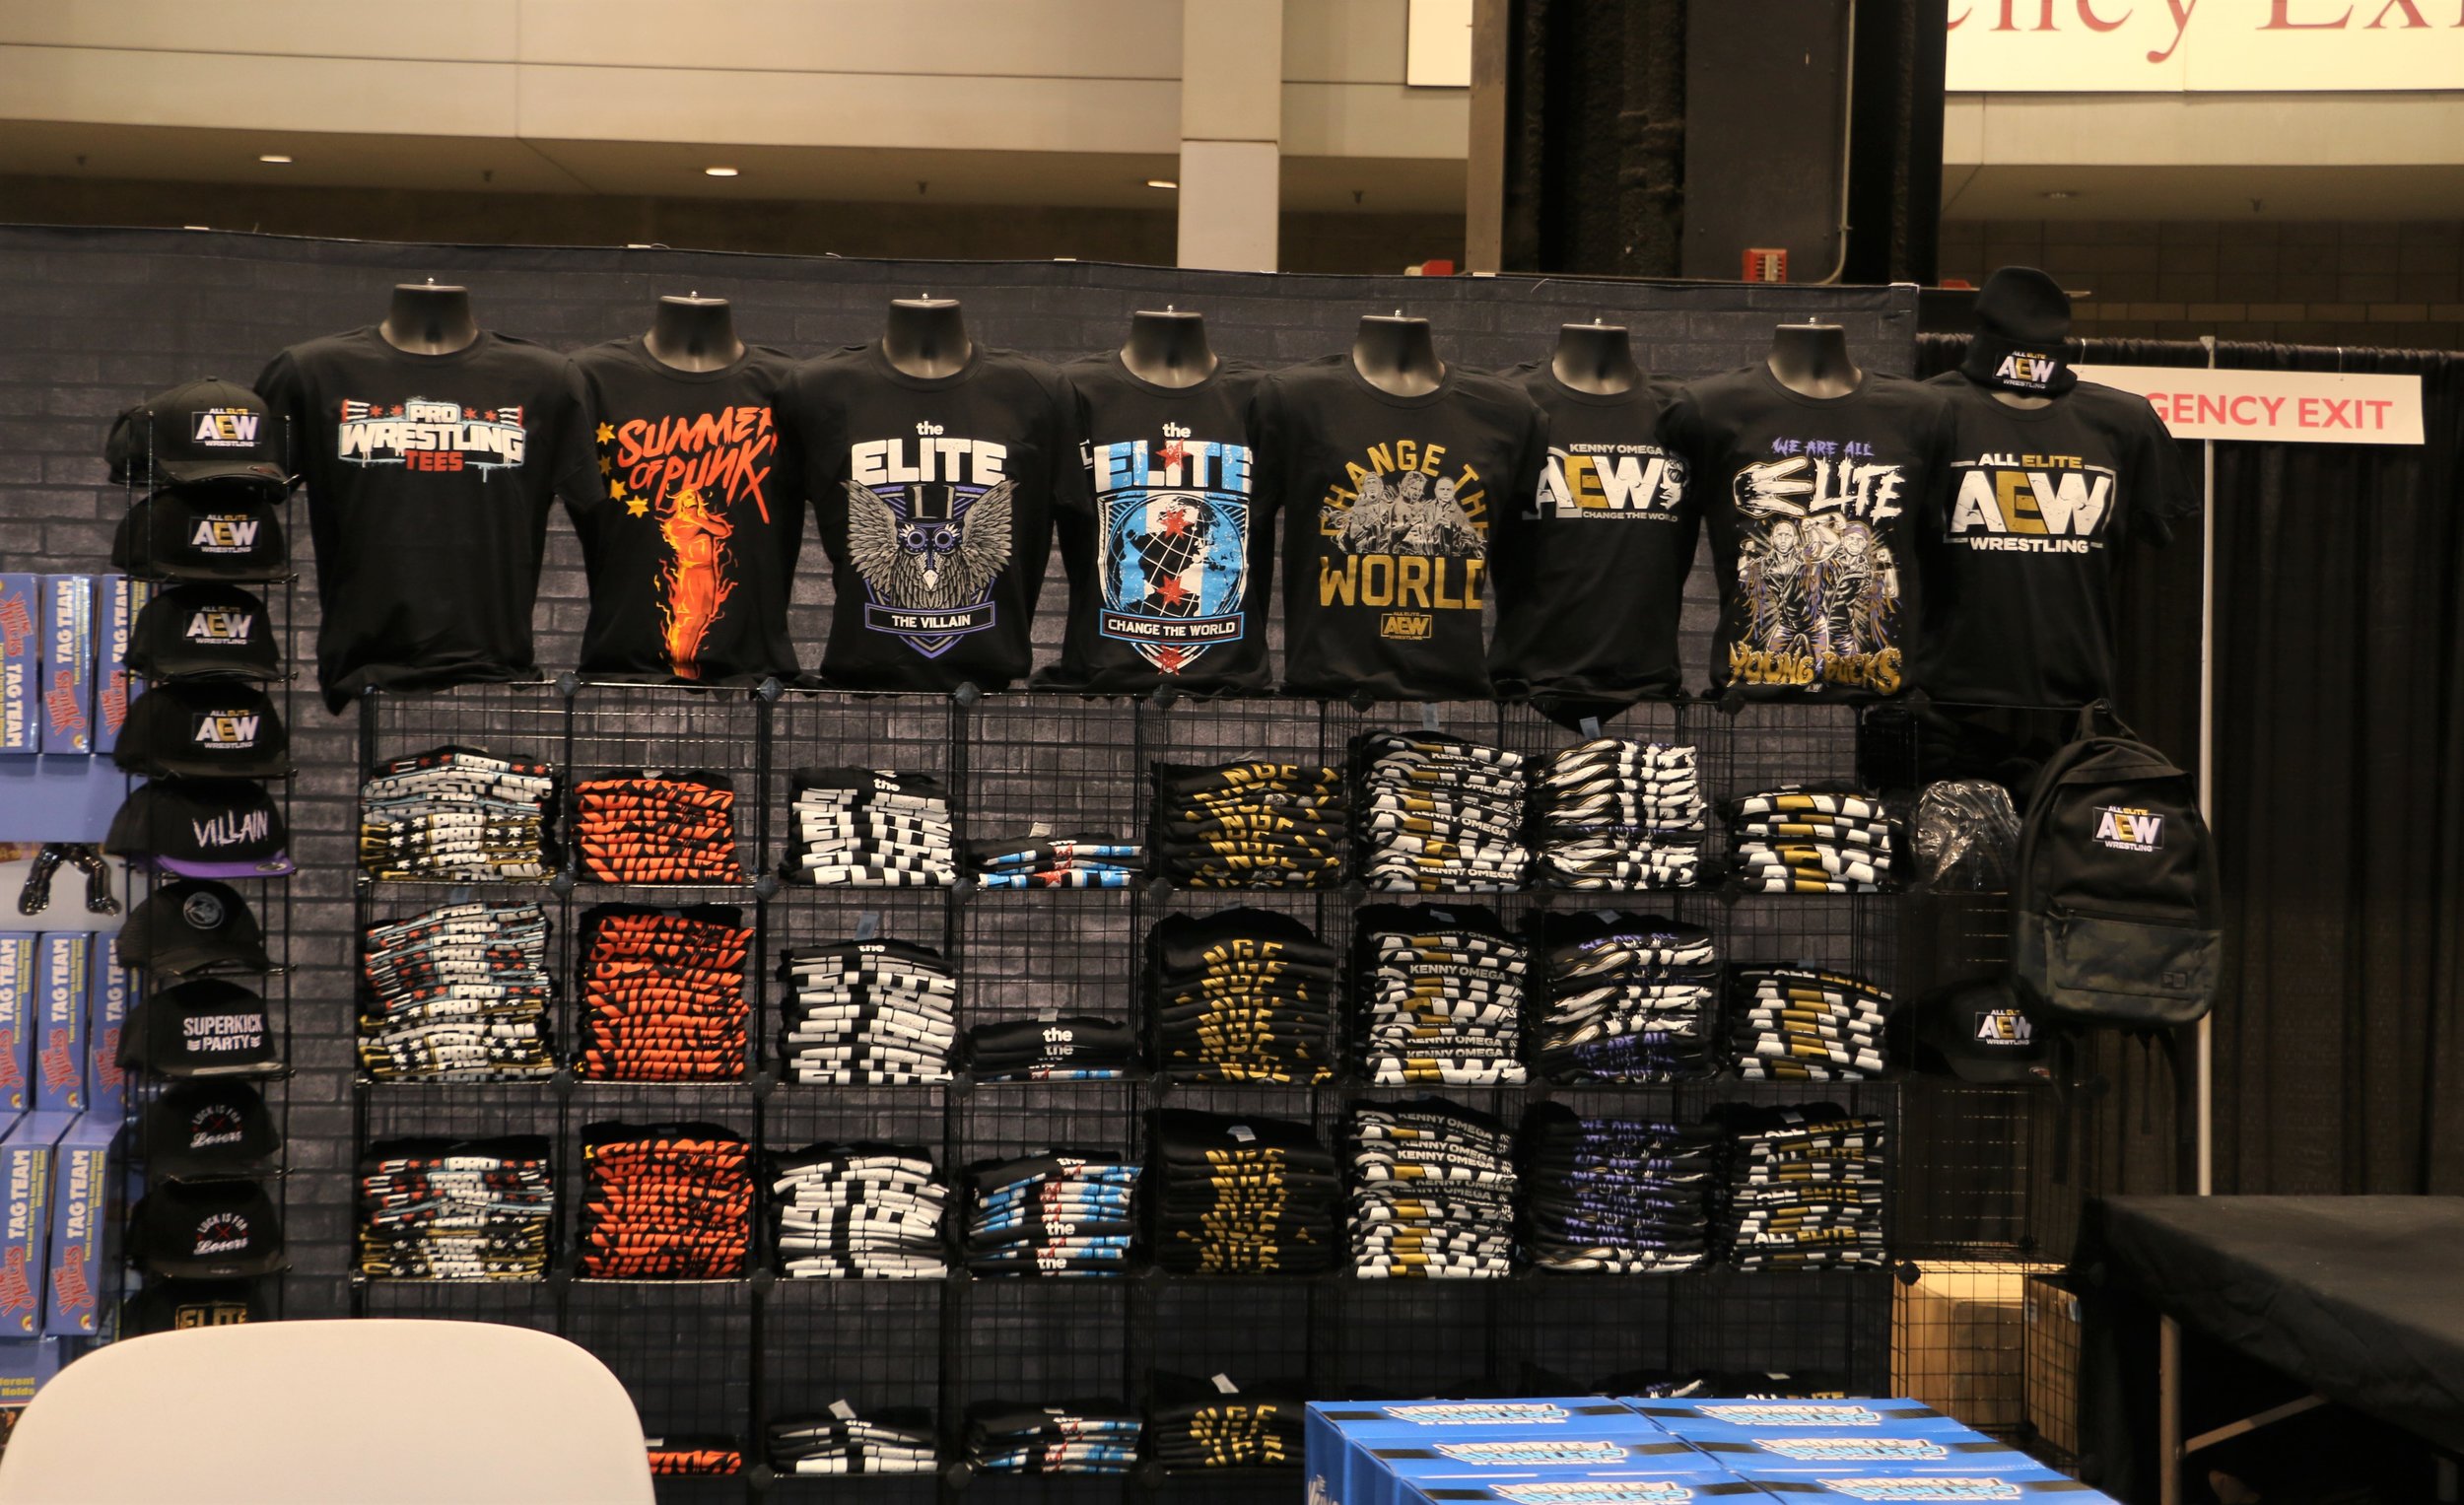  Pro Wrestling Tees booth stocked with T-shirts. 